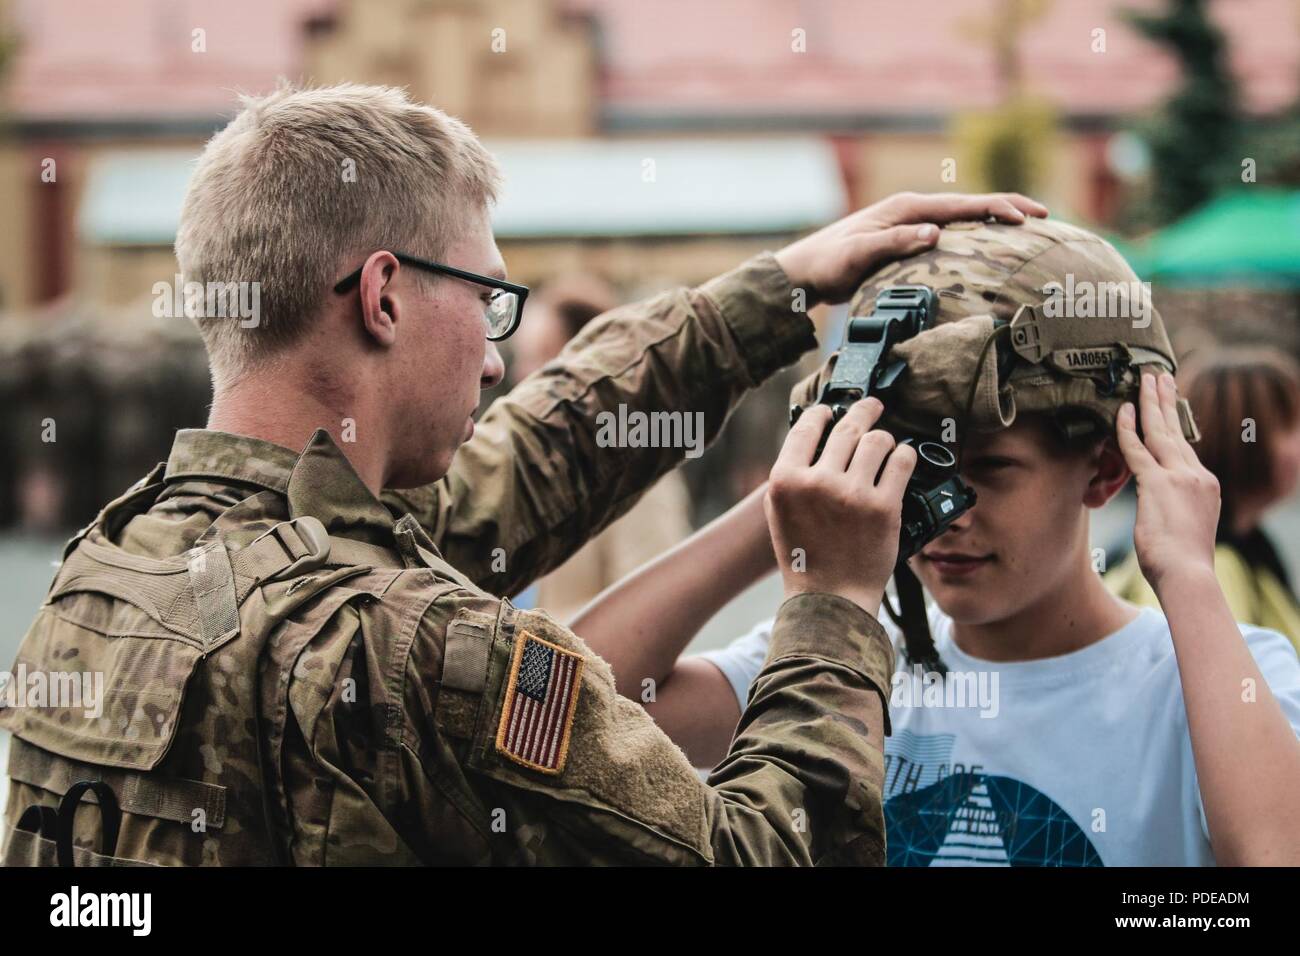 Pfc. Anothony Richardson, a Benton, Arkansas native and infantryman with 1st Squadron, 2nd Cavalry Regiment, puts his Kevlar helmet onto a Polish citizen during an event to celebrate the anniversary of the polish boarder guard with Battle Group Poland at Ketrzyn, Poland on May 18, 2018. Battle Group Poland is a unique, multinational coalition of U.S., U.K., Croatian and Romanian Soldiers who serve with the Polish 15th Mechanized Brigade as a deterrence force in support of NATO’s Enhanced Forward Presence. Stock Photo